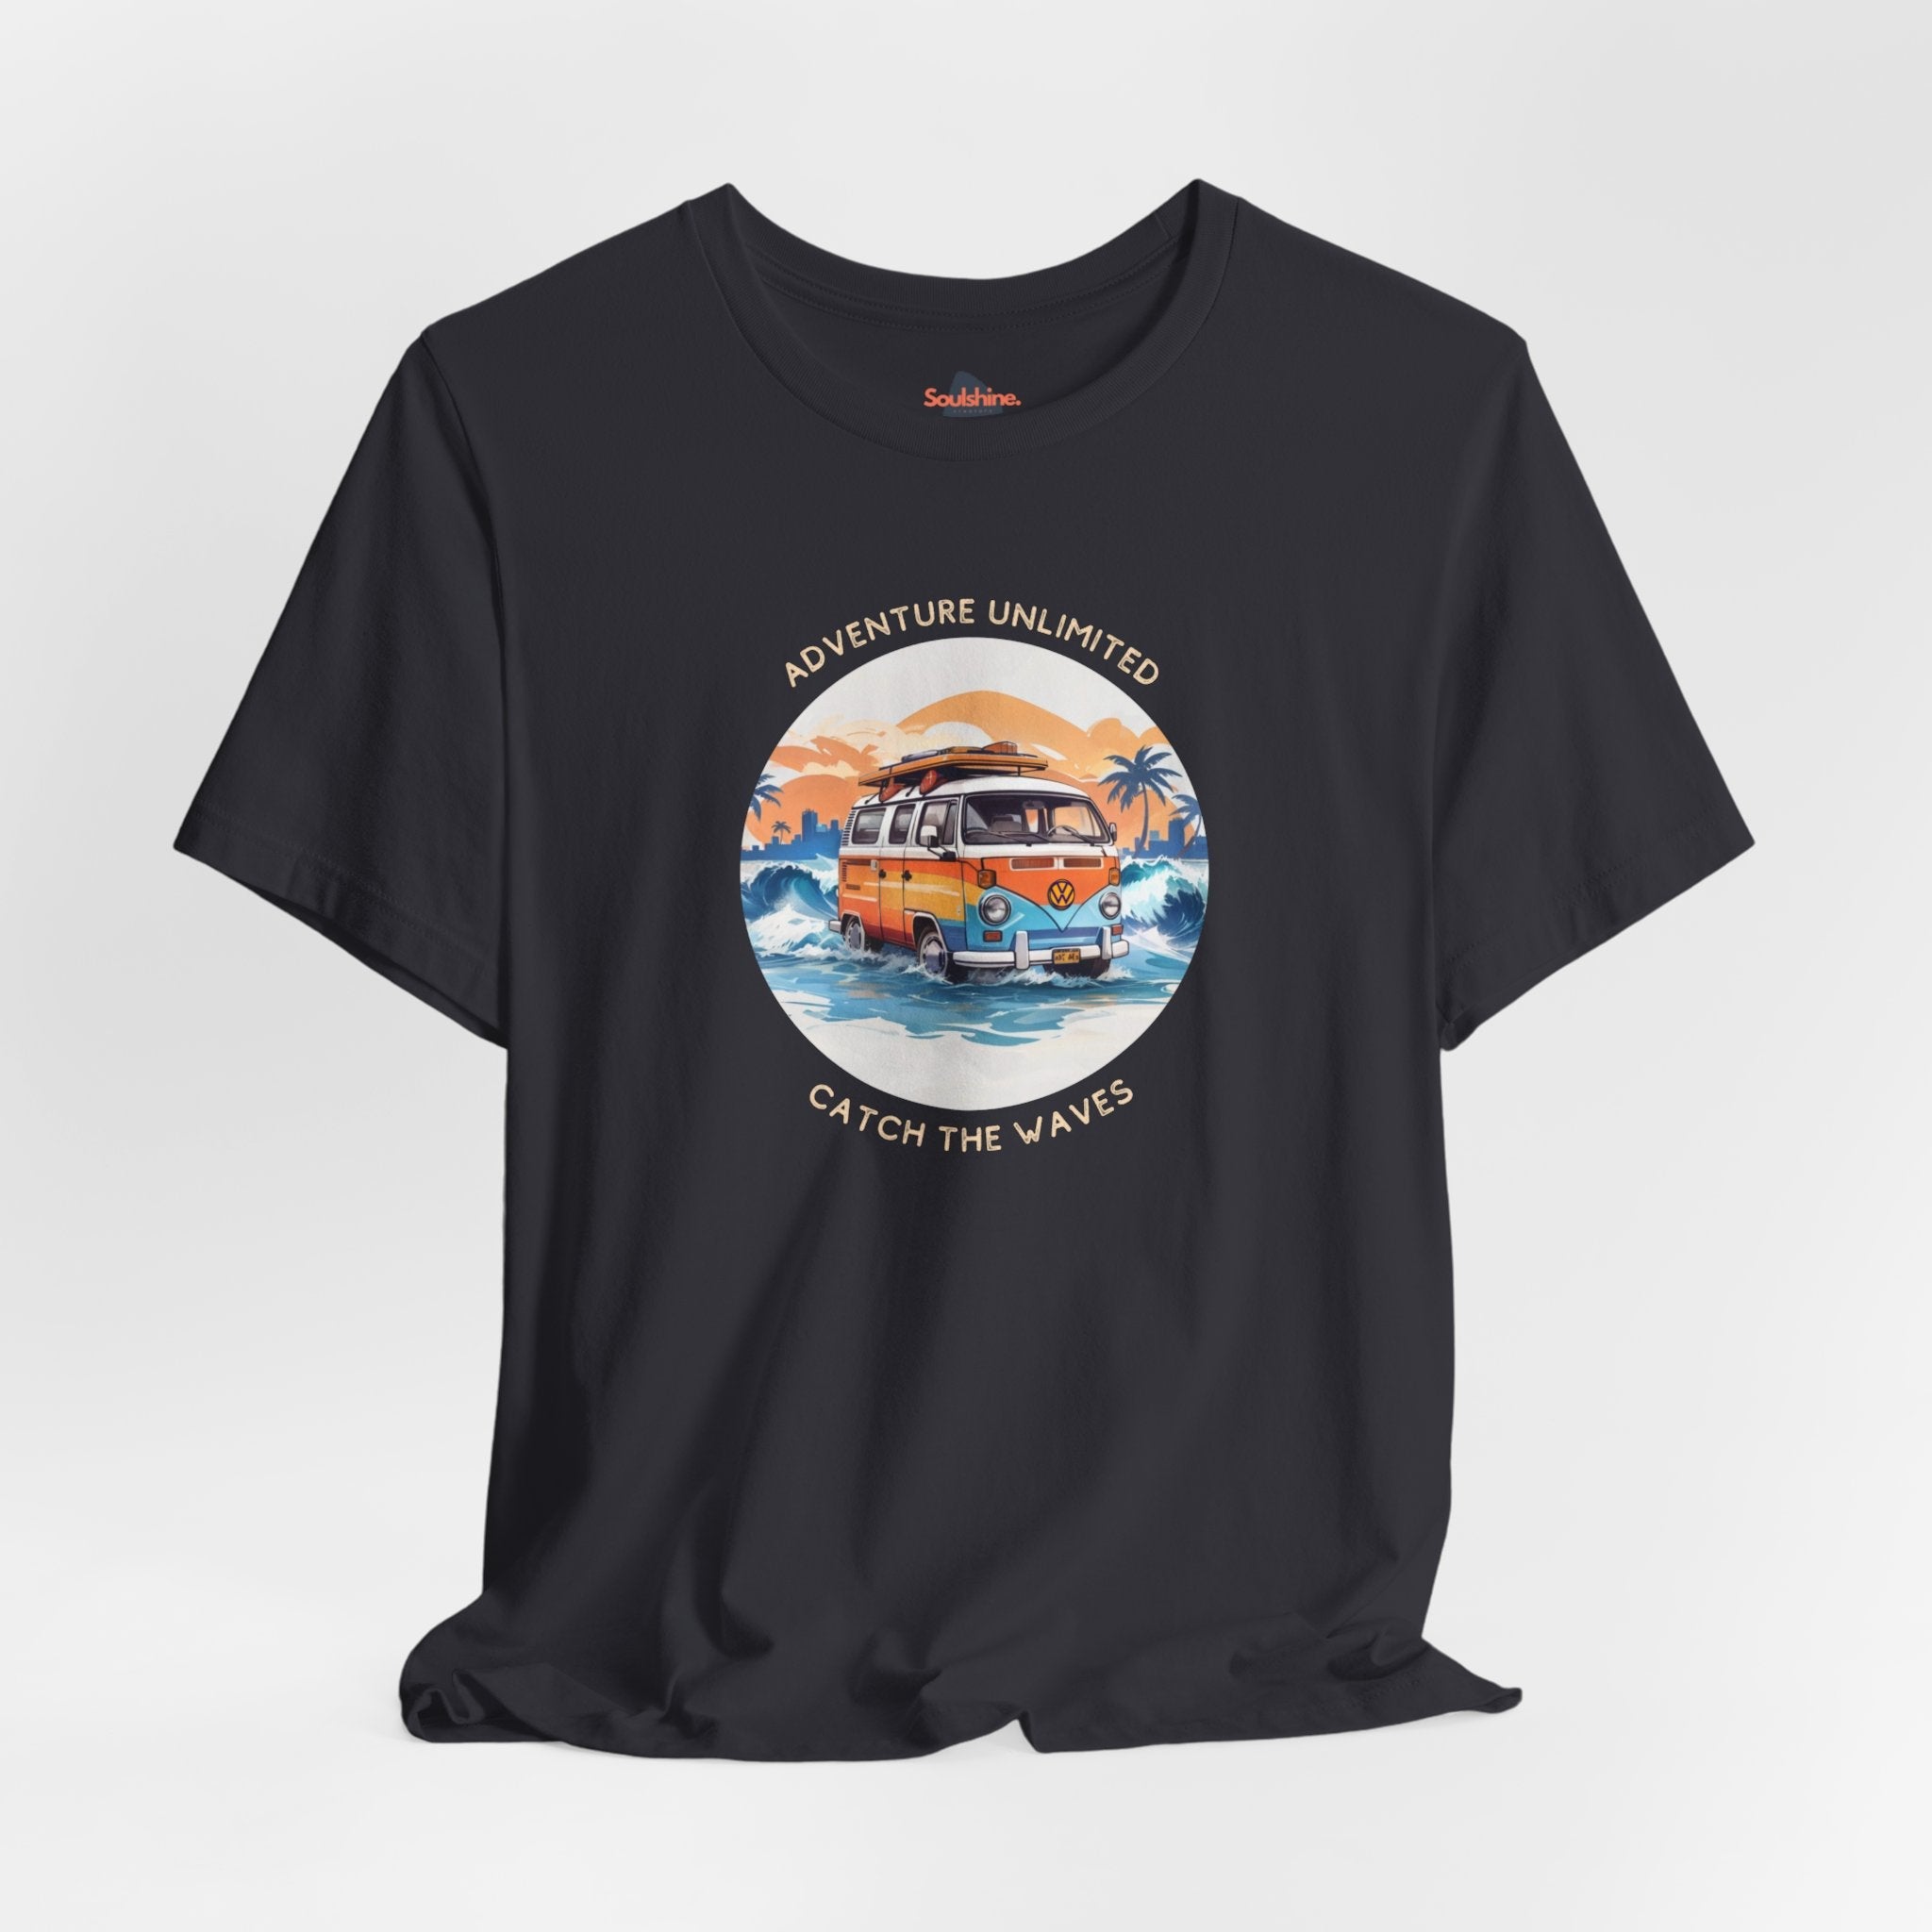 Adventure Unlimited - Unisex Jersey Short Sleeve Tee - US direct-to-garment printed black shirt with van on beach